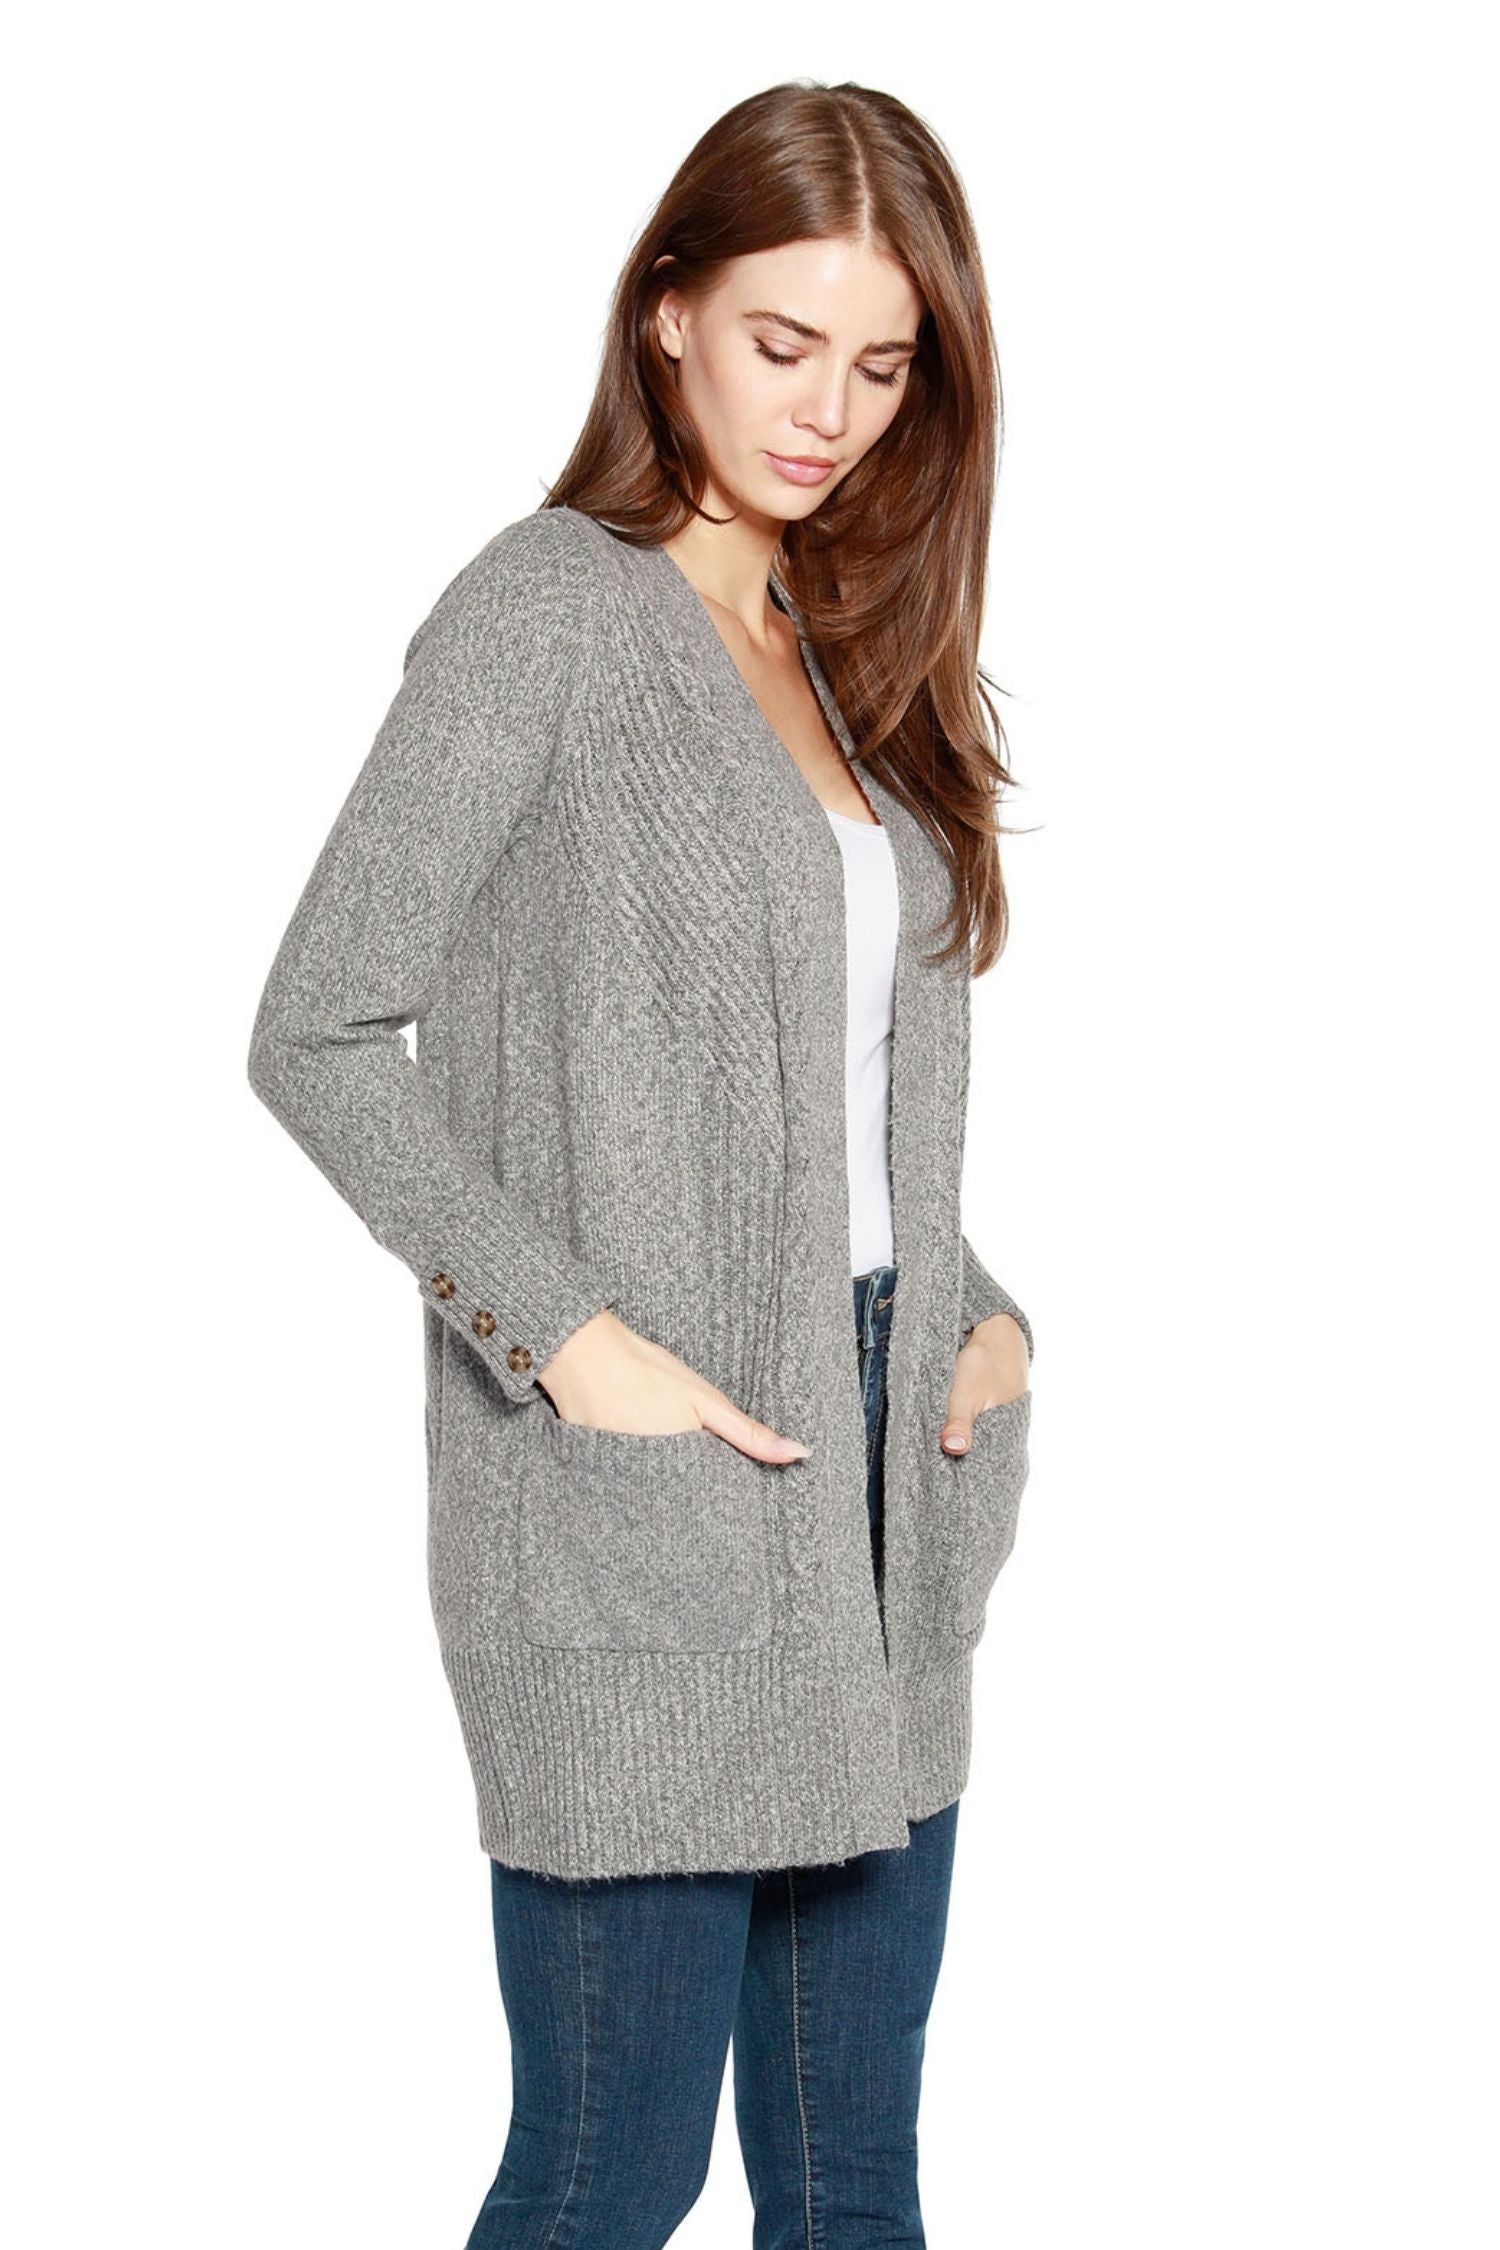 Women's Lightweight Spring Cardigan Sweater Ribbed Cable Knit with Pockets